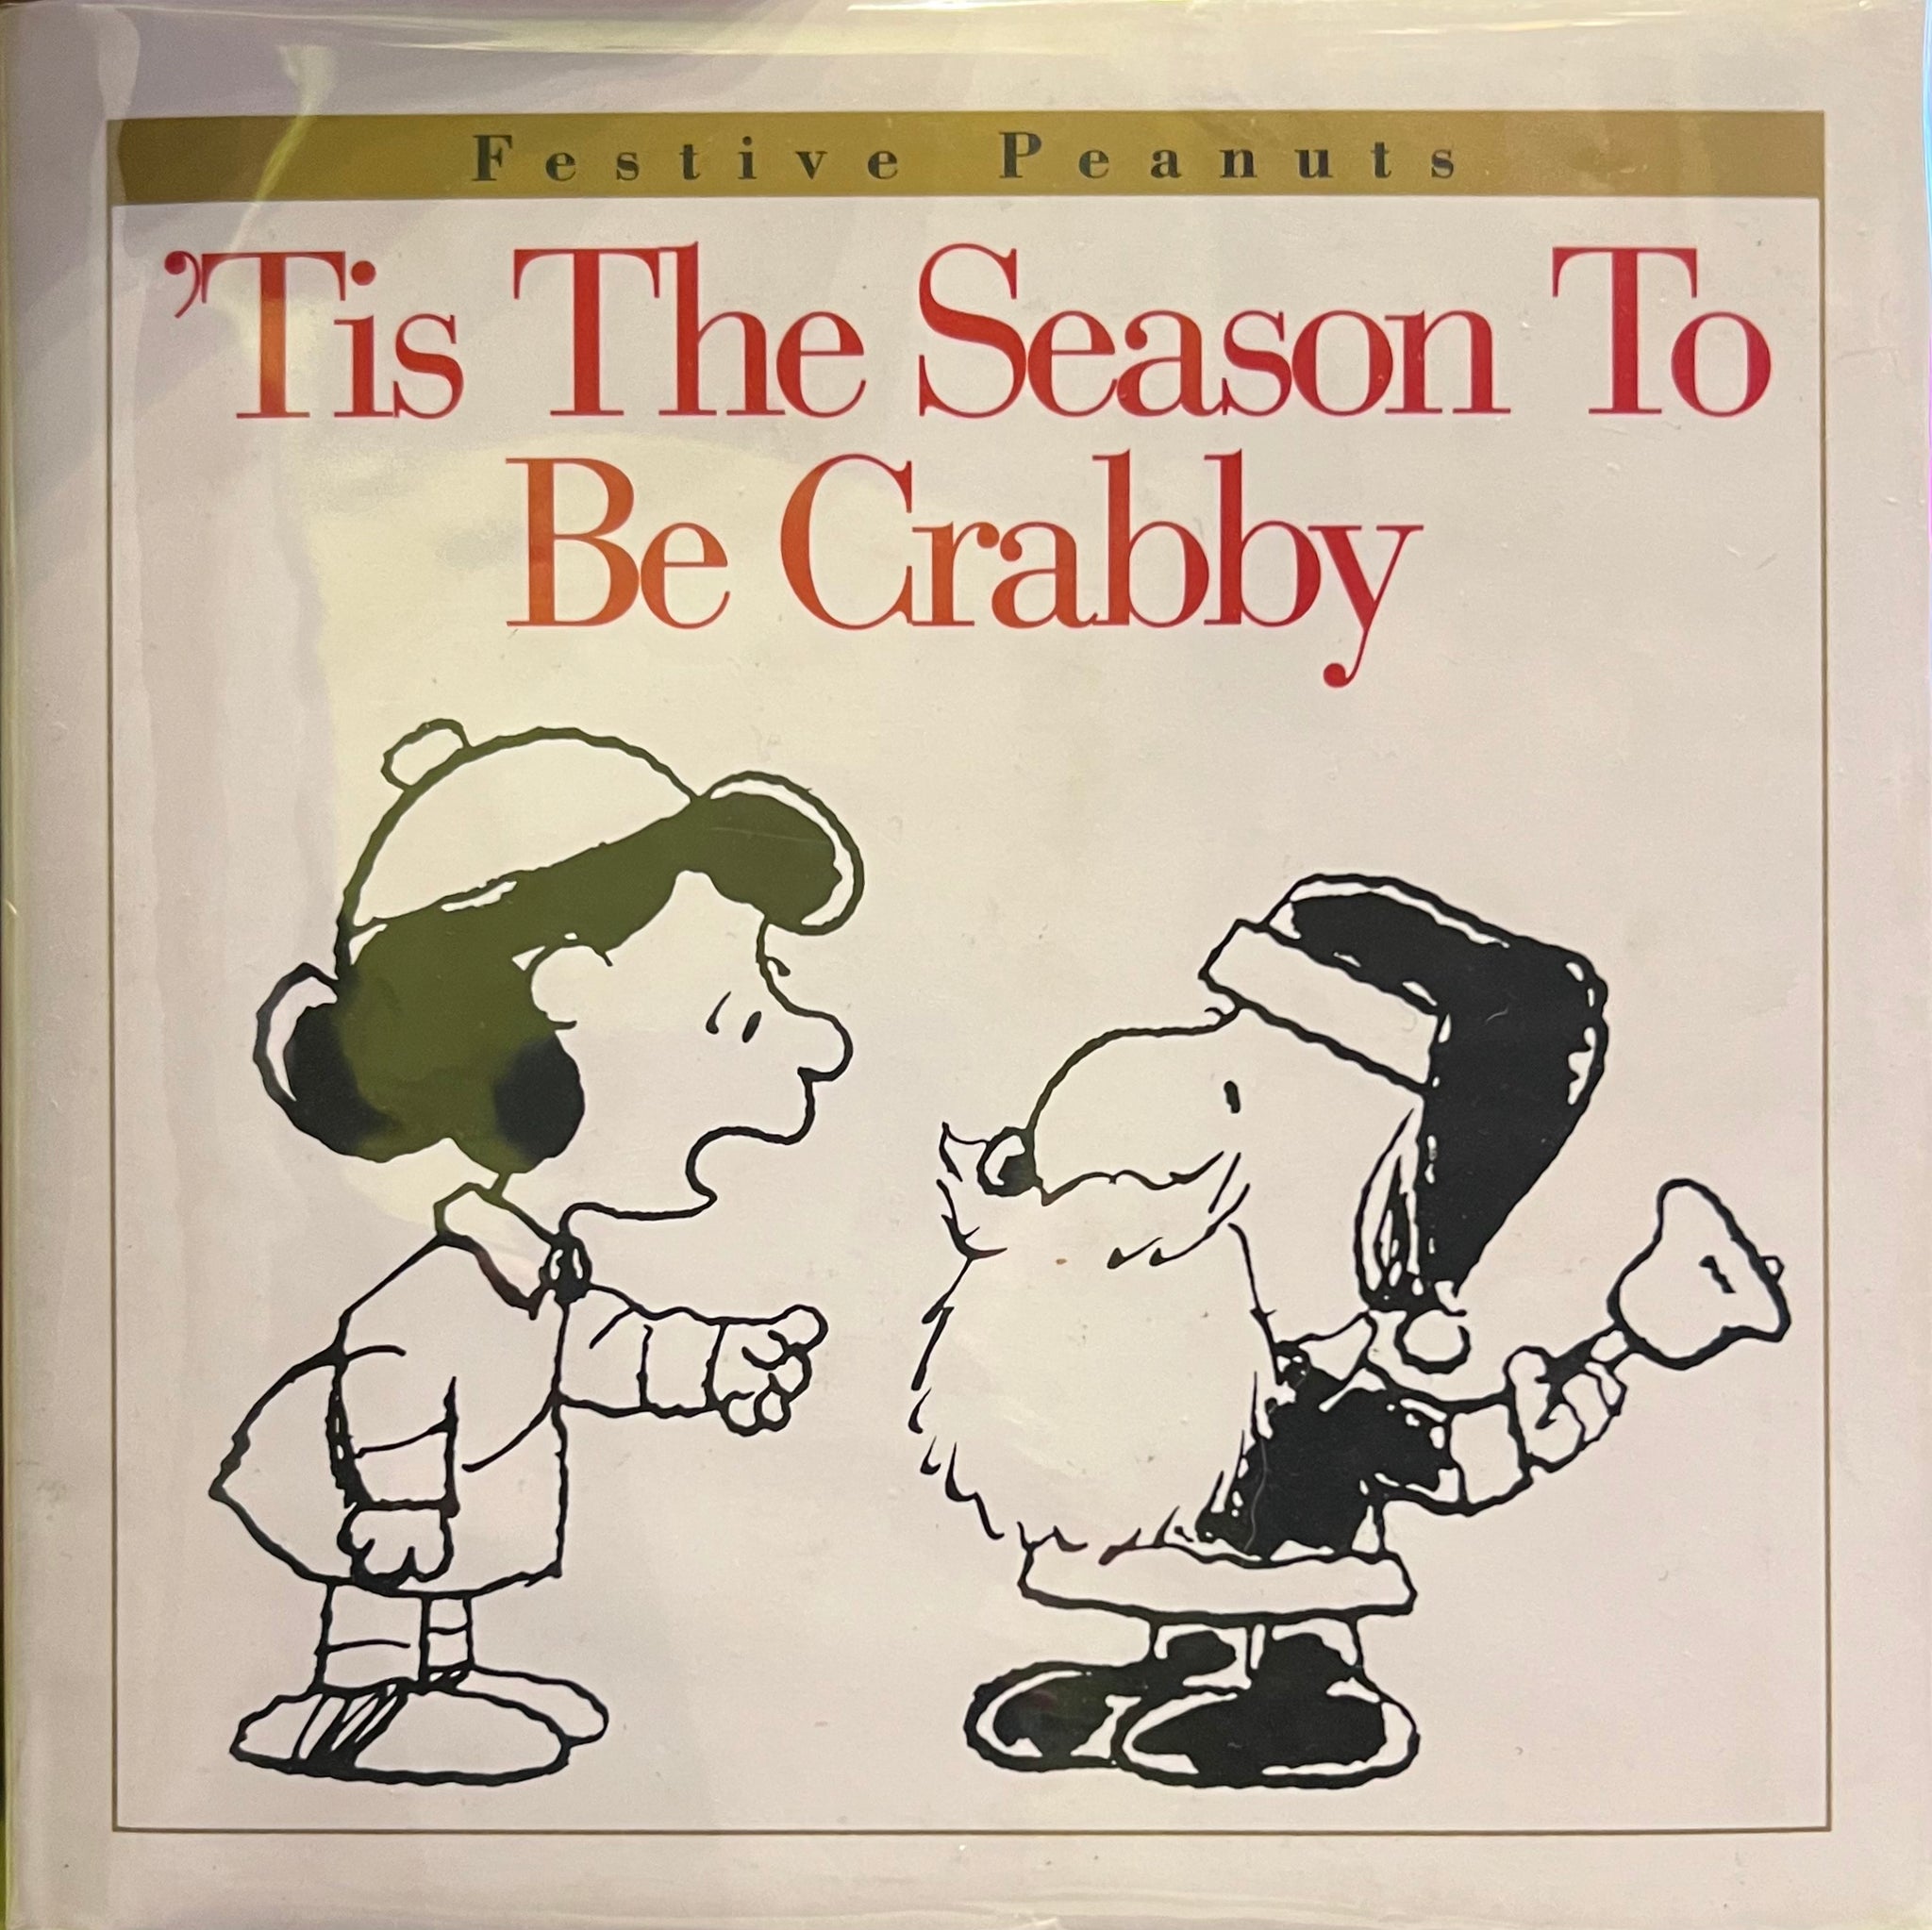 ‘Tis the Season to be Crabby (Festive Peanuts), Charles M. Schulz